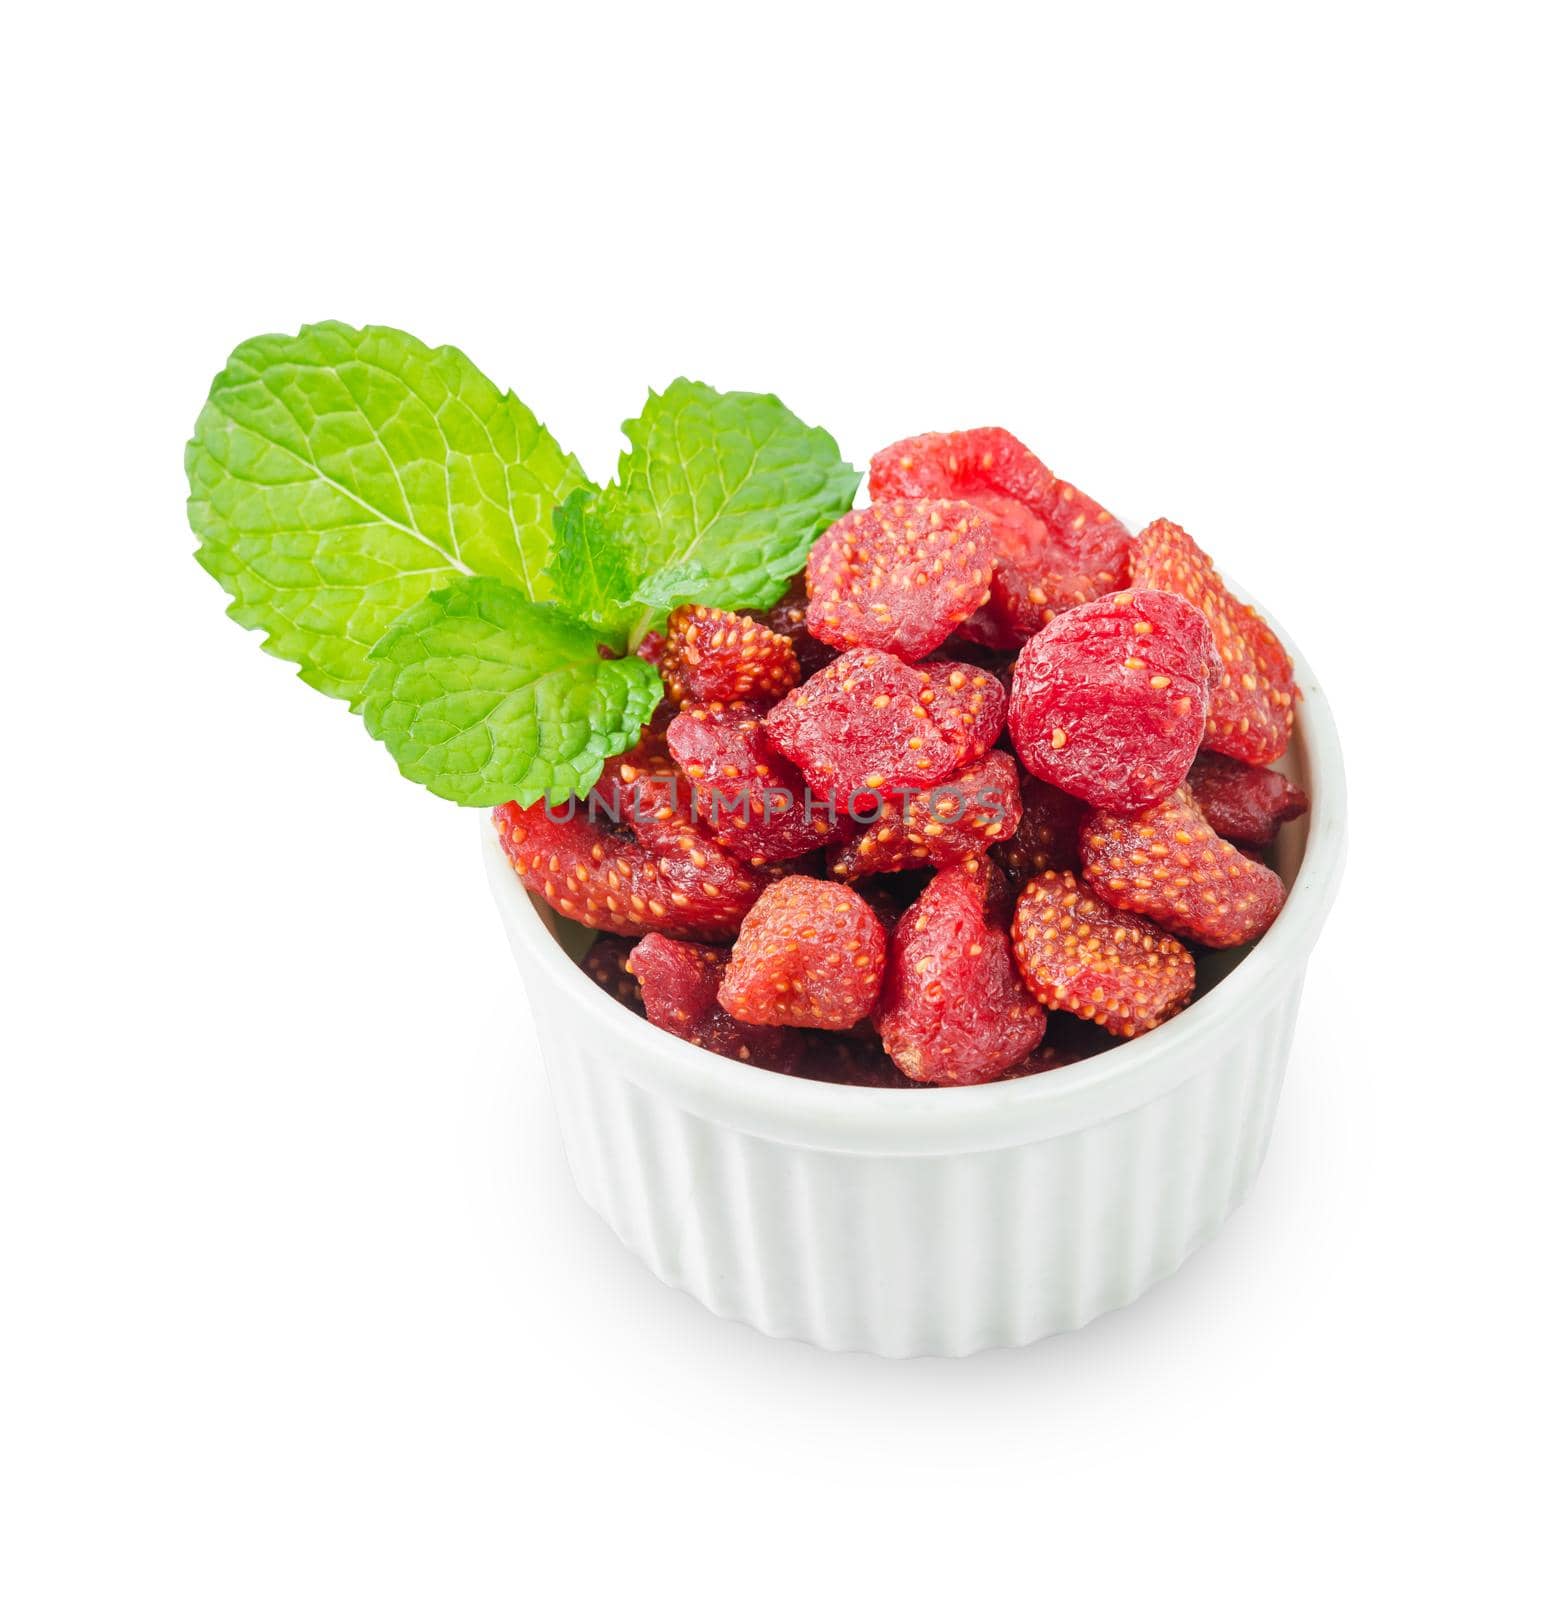 Dried sweet strawberries with green leaf in with bowl isolated on white background, save clipping path.